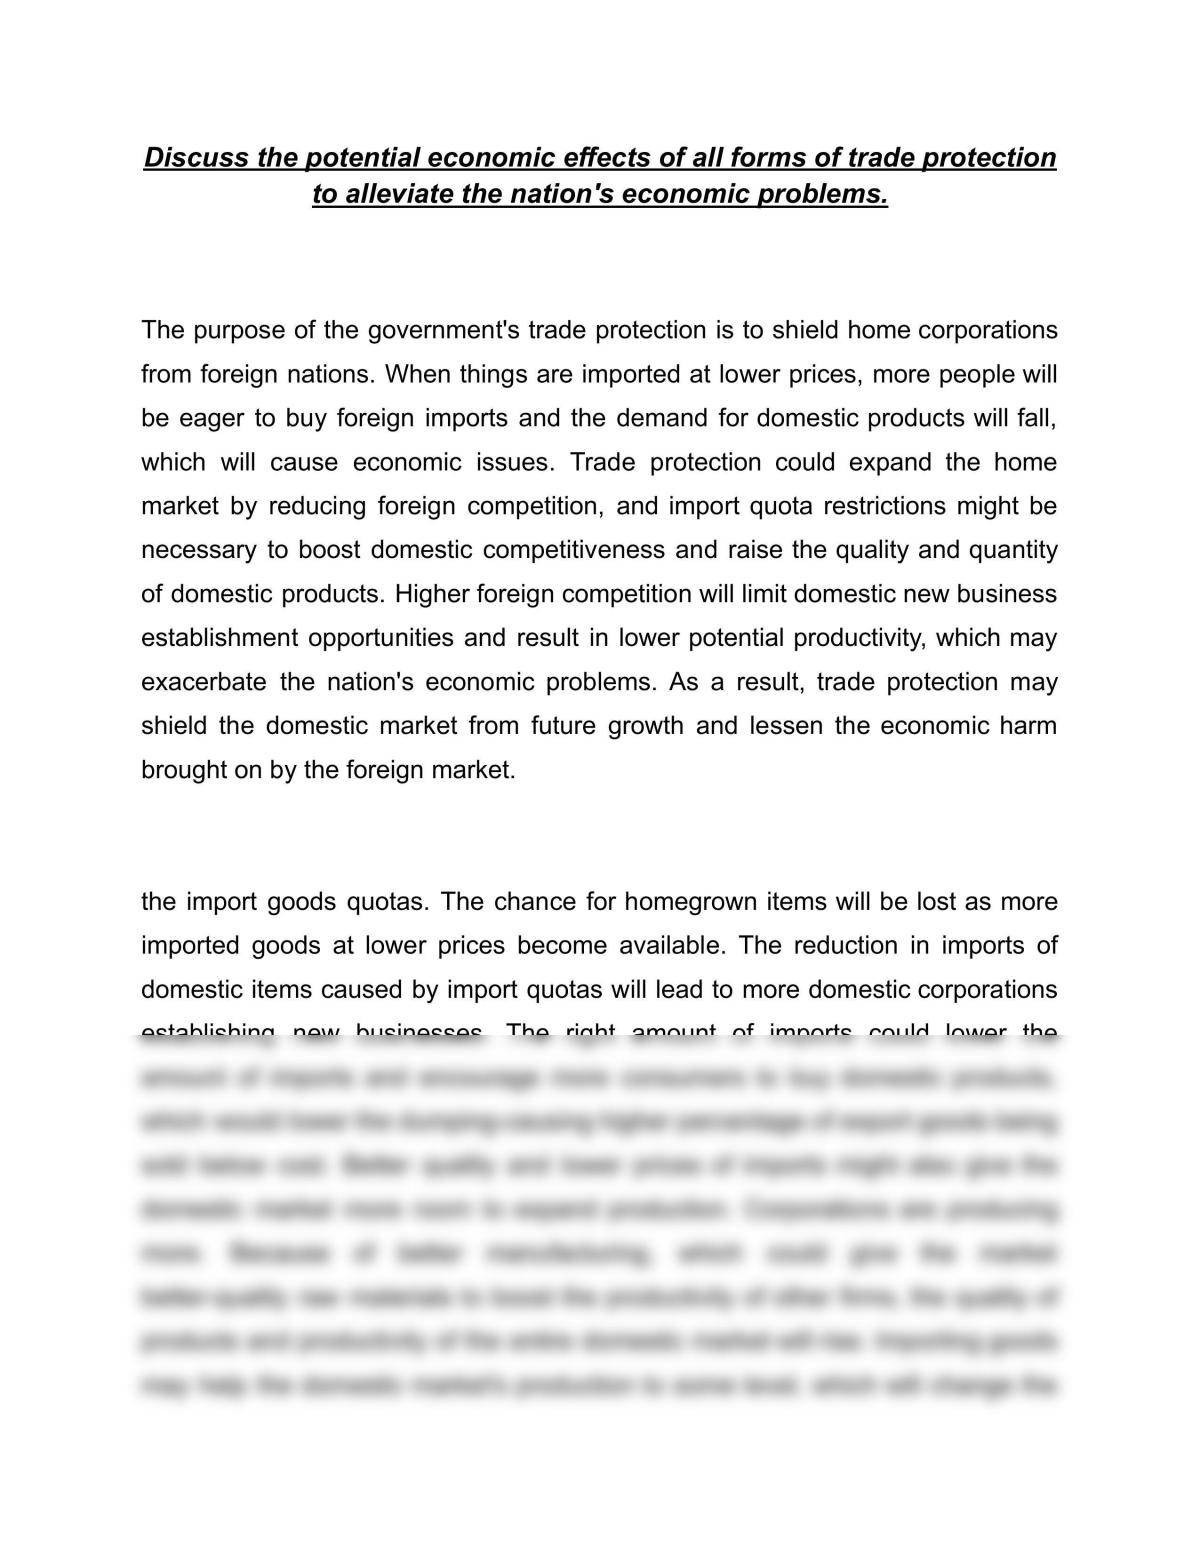 Protection trading minimises economic difficulties. - Page 1